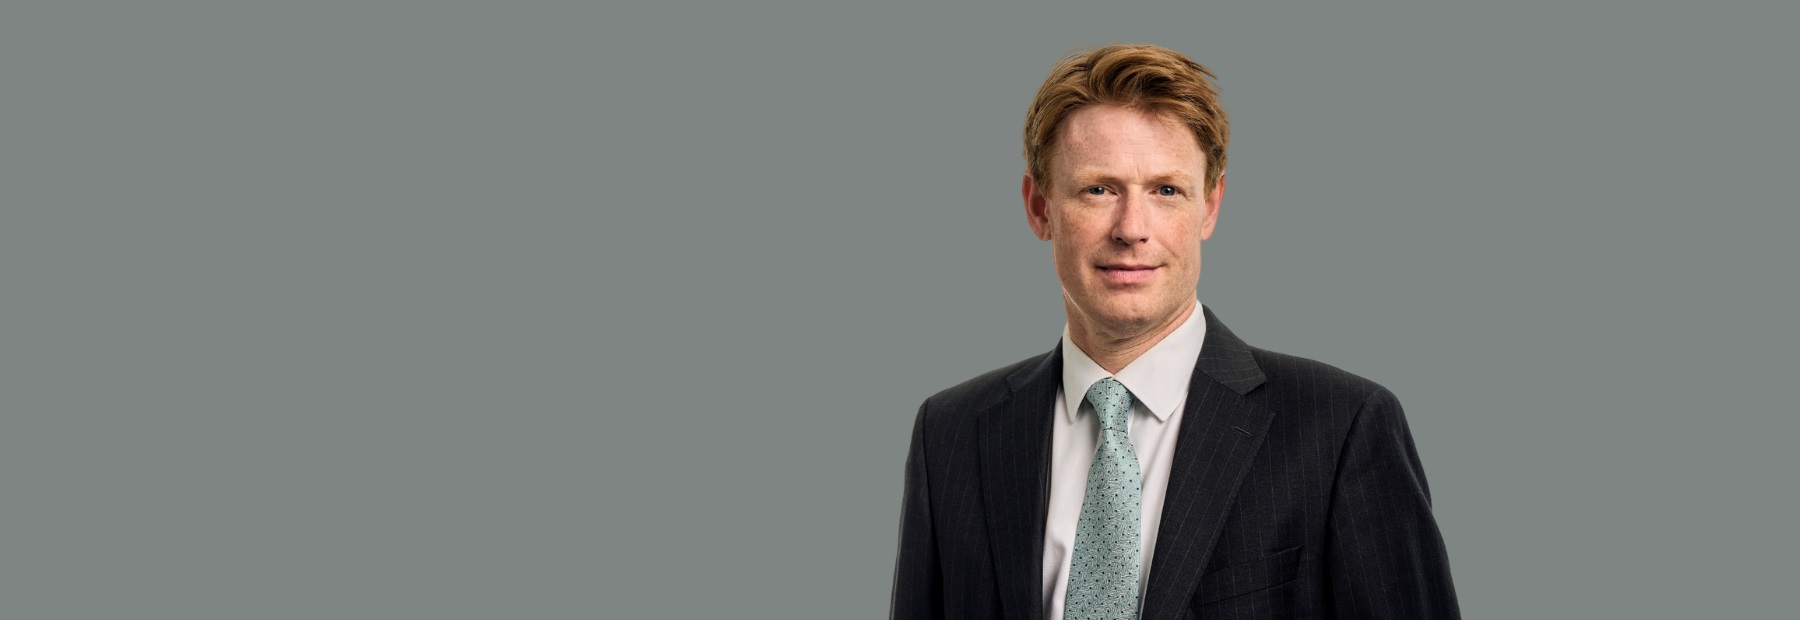 Oliver Morley, PPF Chief Executive 